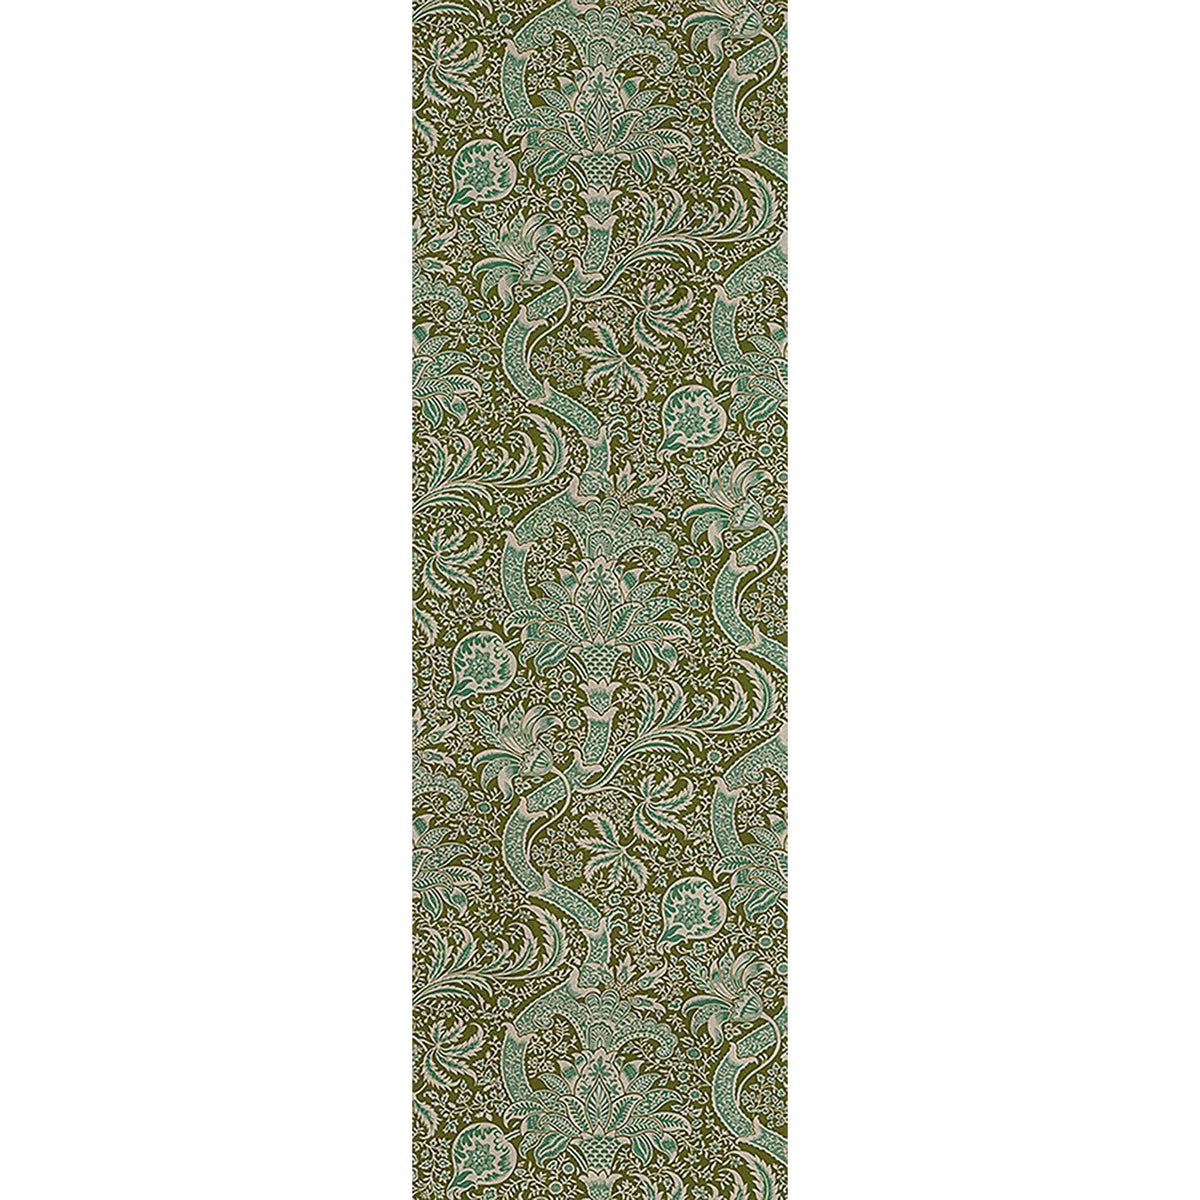 Indian Olive and Teal 36x115